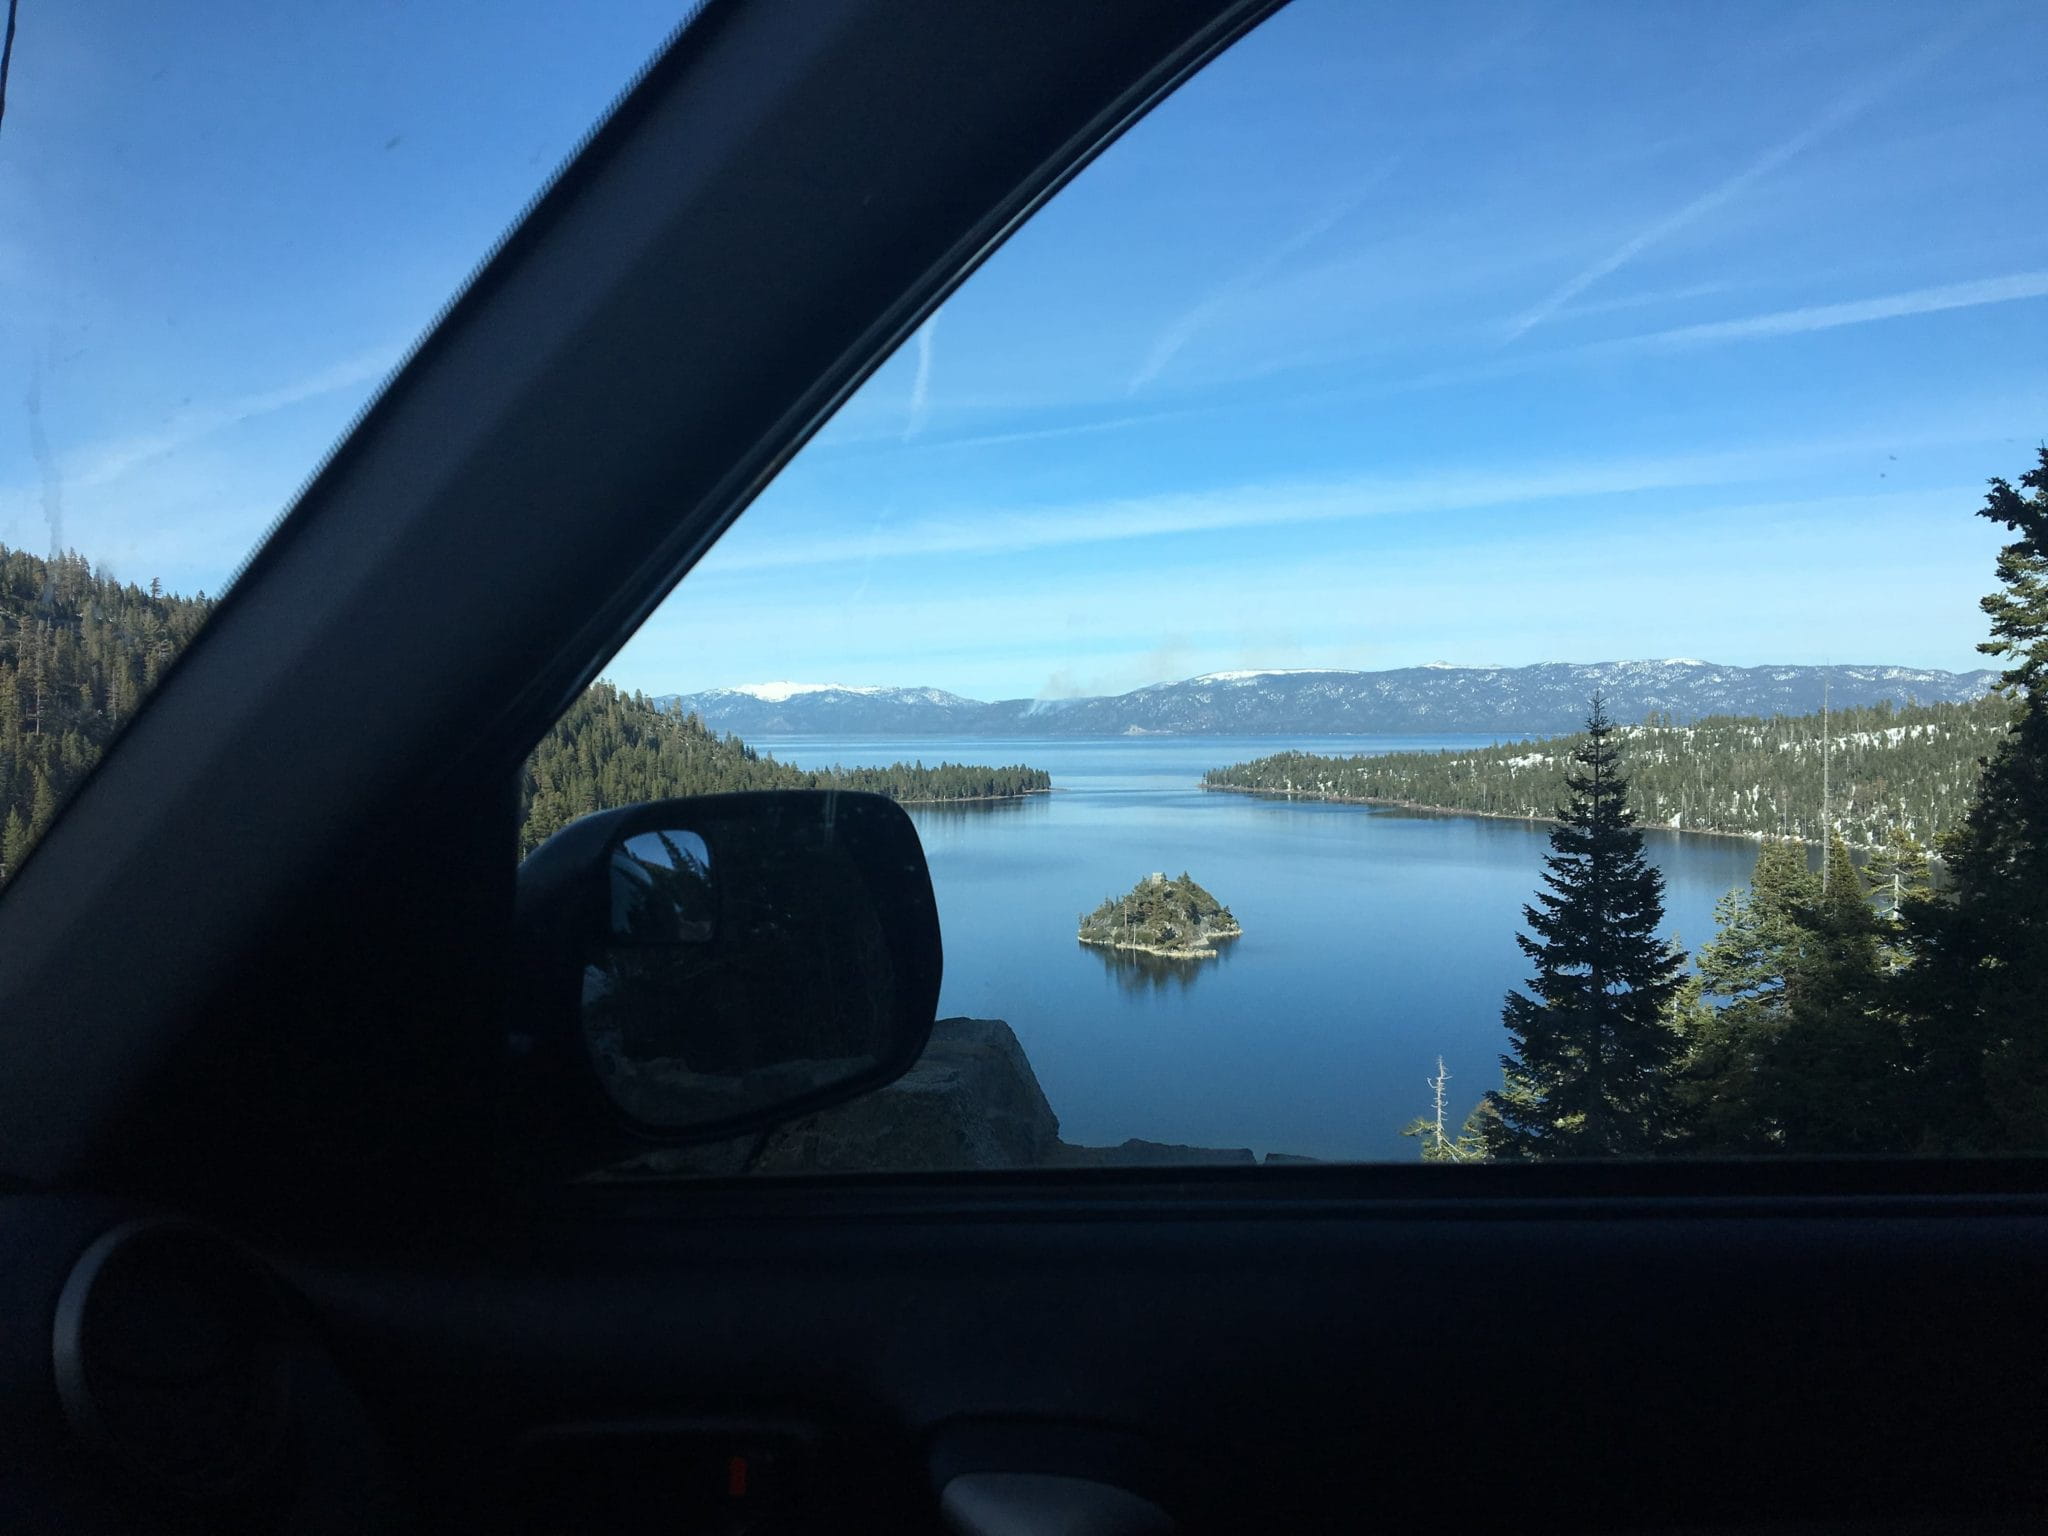 Drive by Emerald Bay State Park for a scenic detour on your road trip.